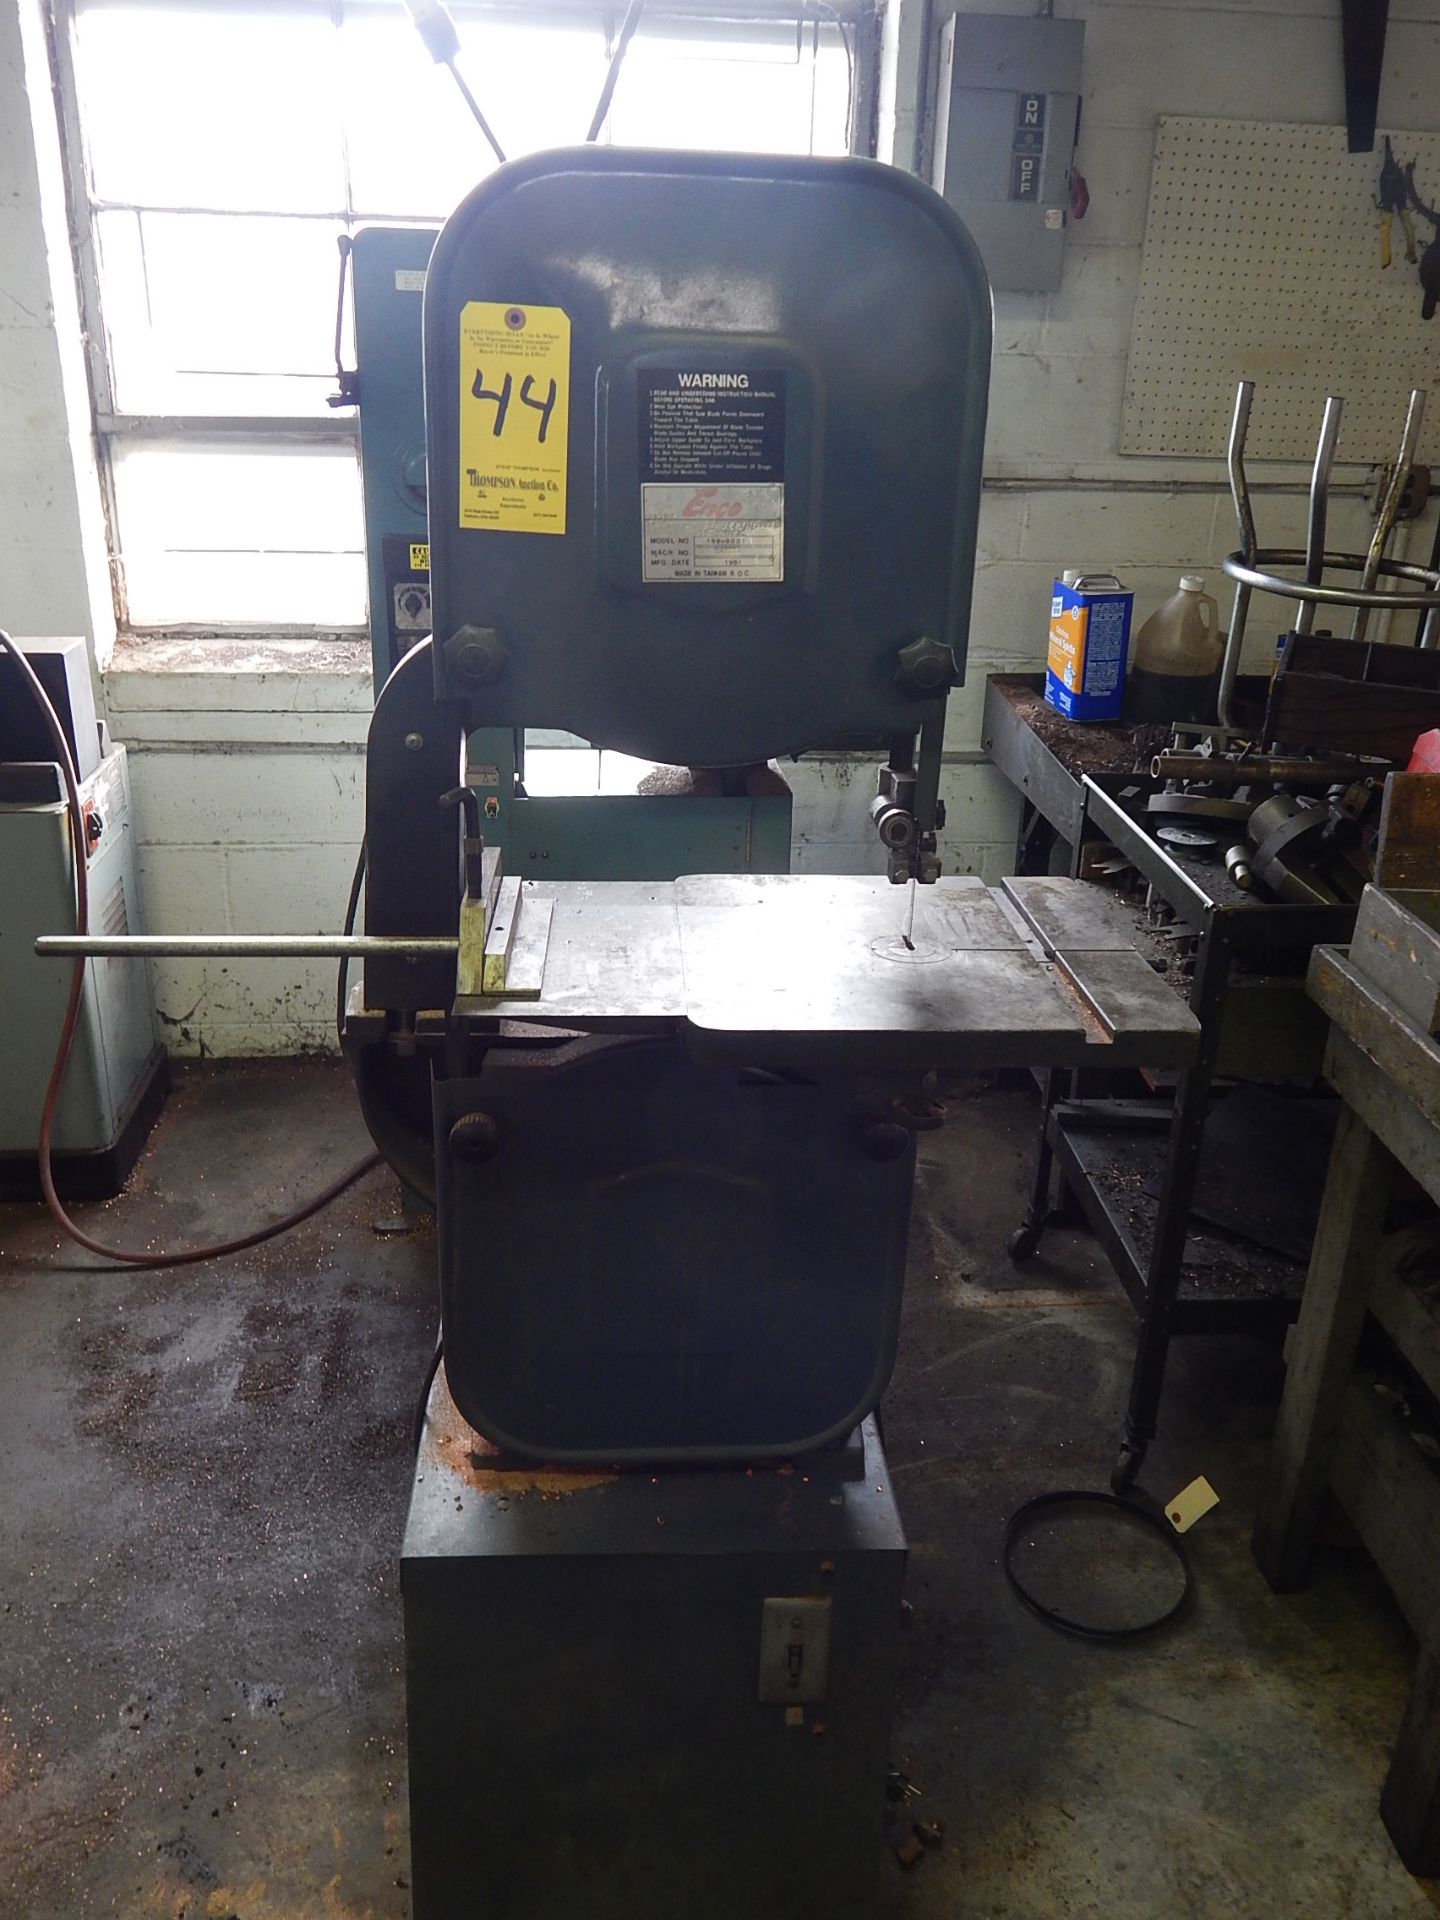 Delta 14" Vertical Band Saw, s/n 141771, Loading Fee $50.00